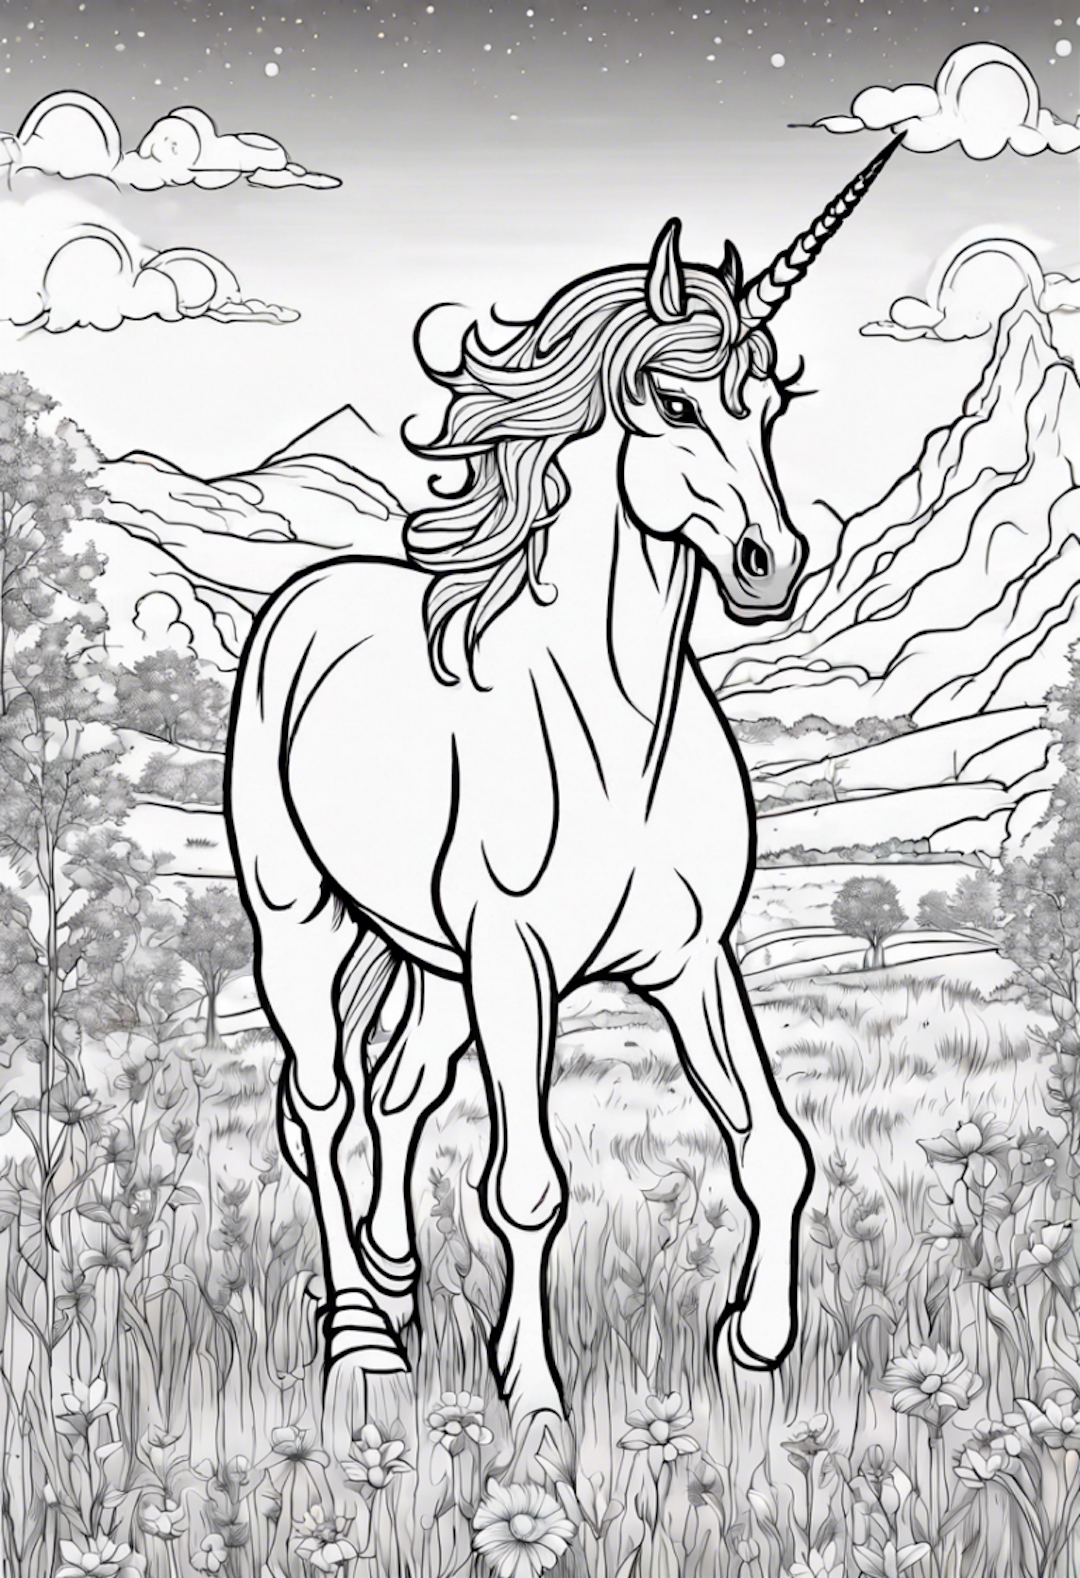 Unicorn Adventure in a Magical Meadow coloring pages